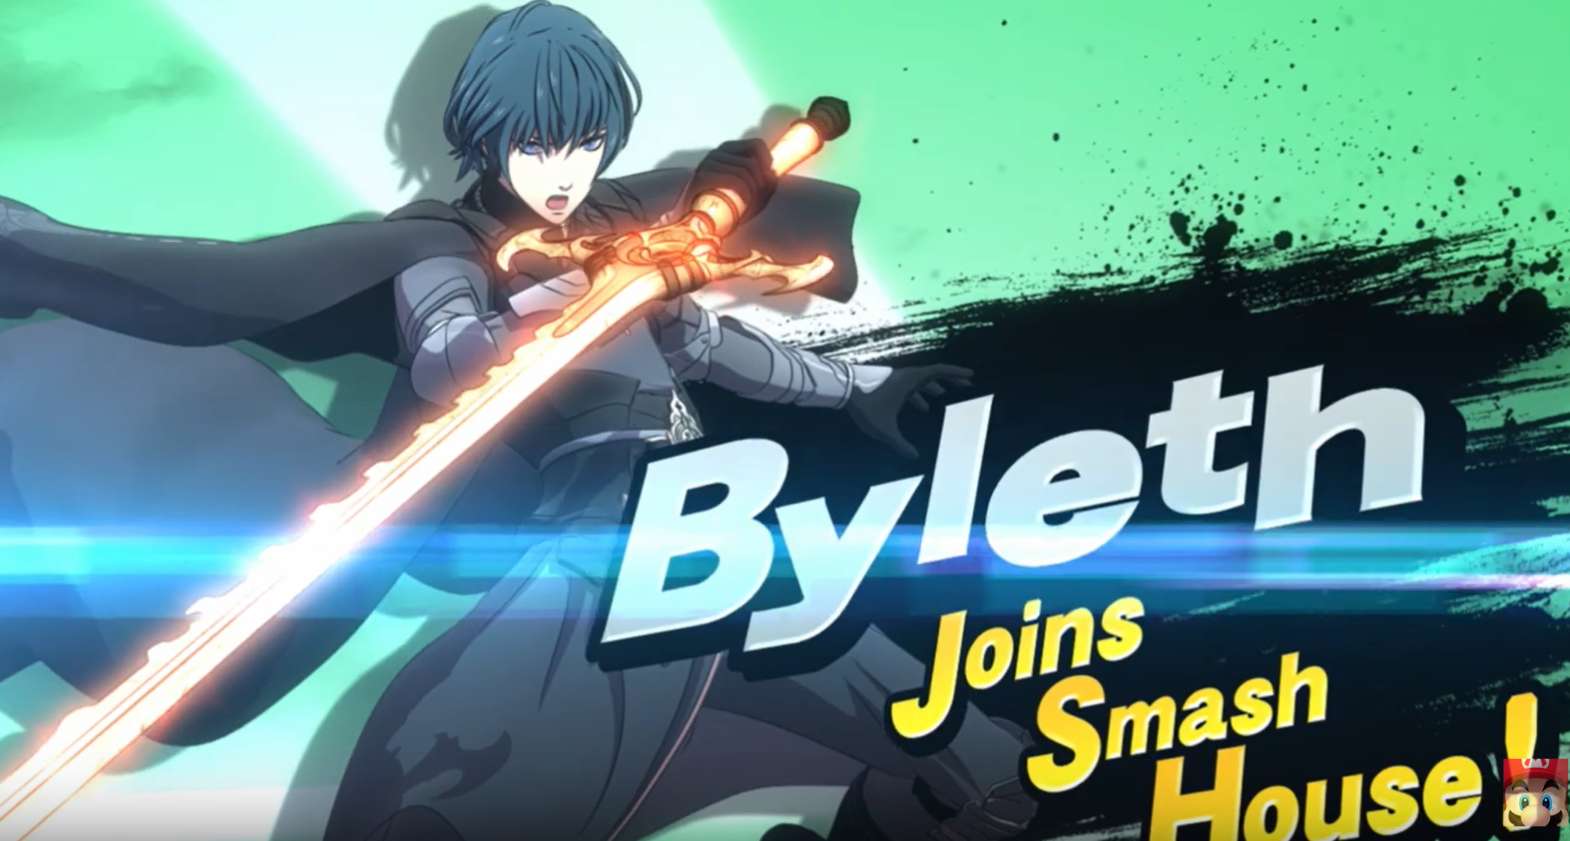 Byleth From Fire Emblem Becomes The Fifth And Final Fighters Pass DLC Character For Super Smash Bros. Ultimate